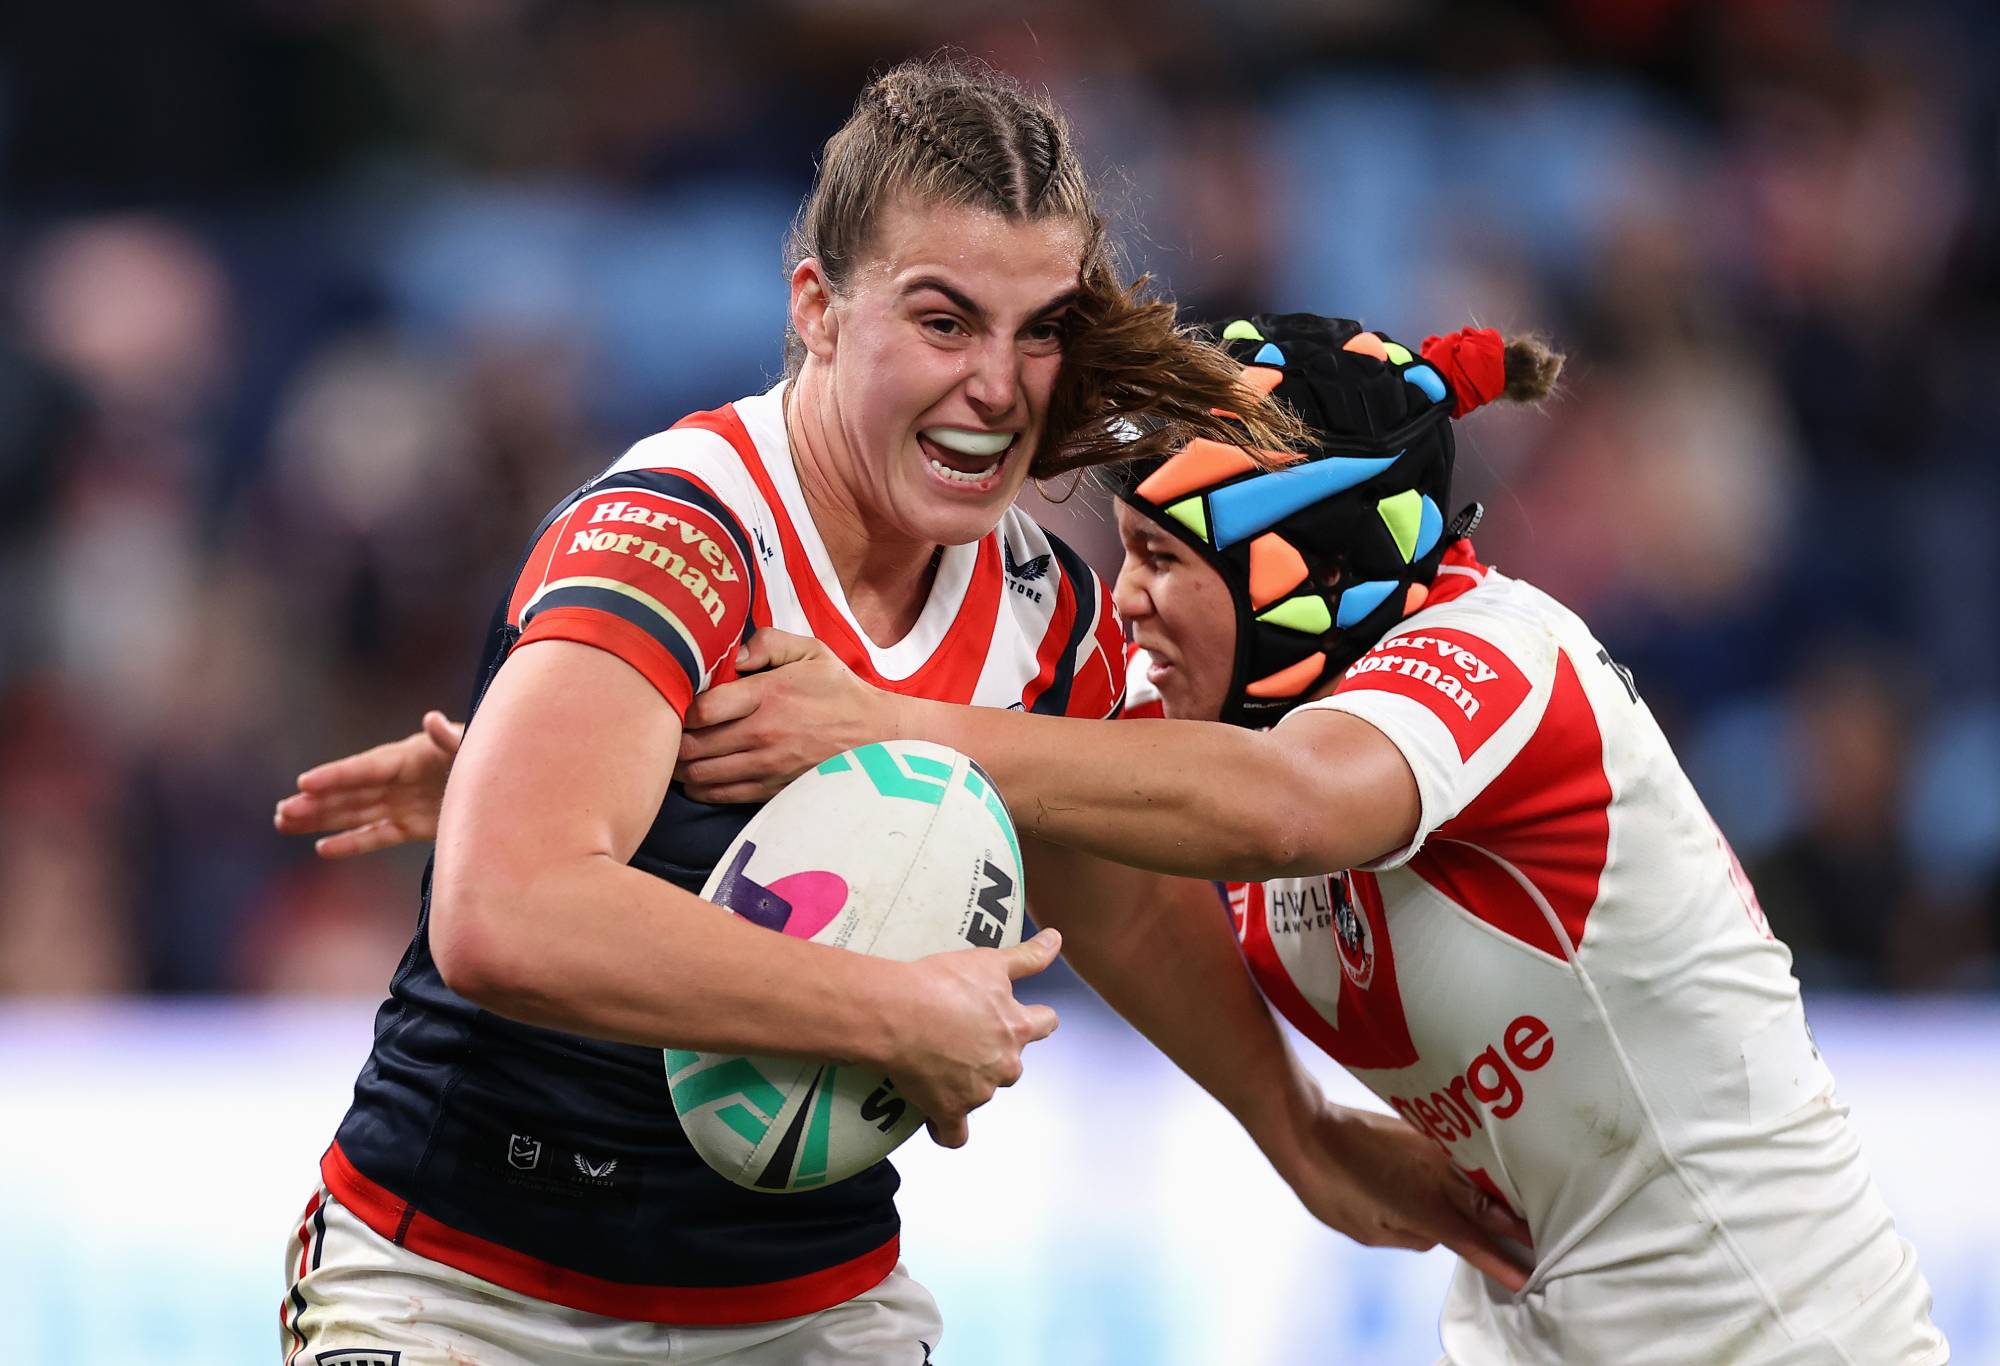 SYDNEY, AUSTRALIA - SEPTEMBER 02: Jessica Sergis of the Roosters is tackled during the round three NRLW match between Sydney Roosters and St George Illawarra Dragons at Allianz Stadium, on September 02, 2022, in Sydney, Australia. (Photo by Cameron Spencer/Getty Images)